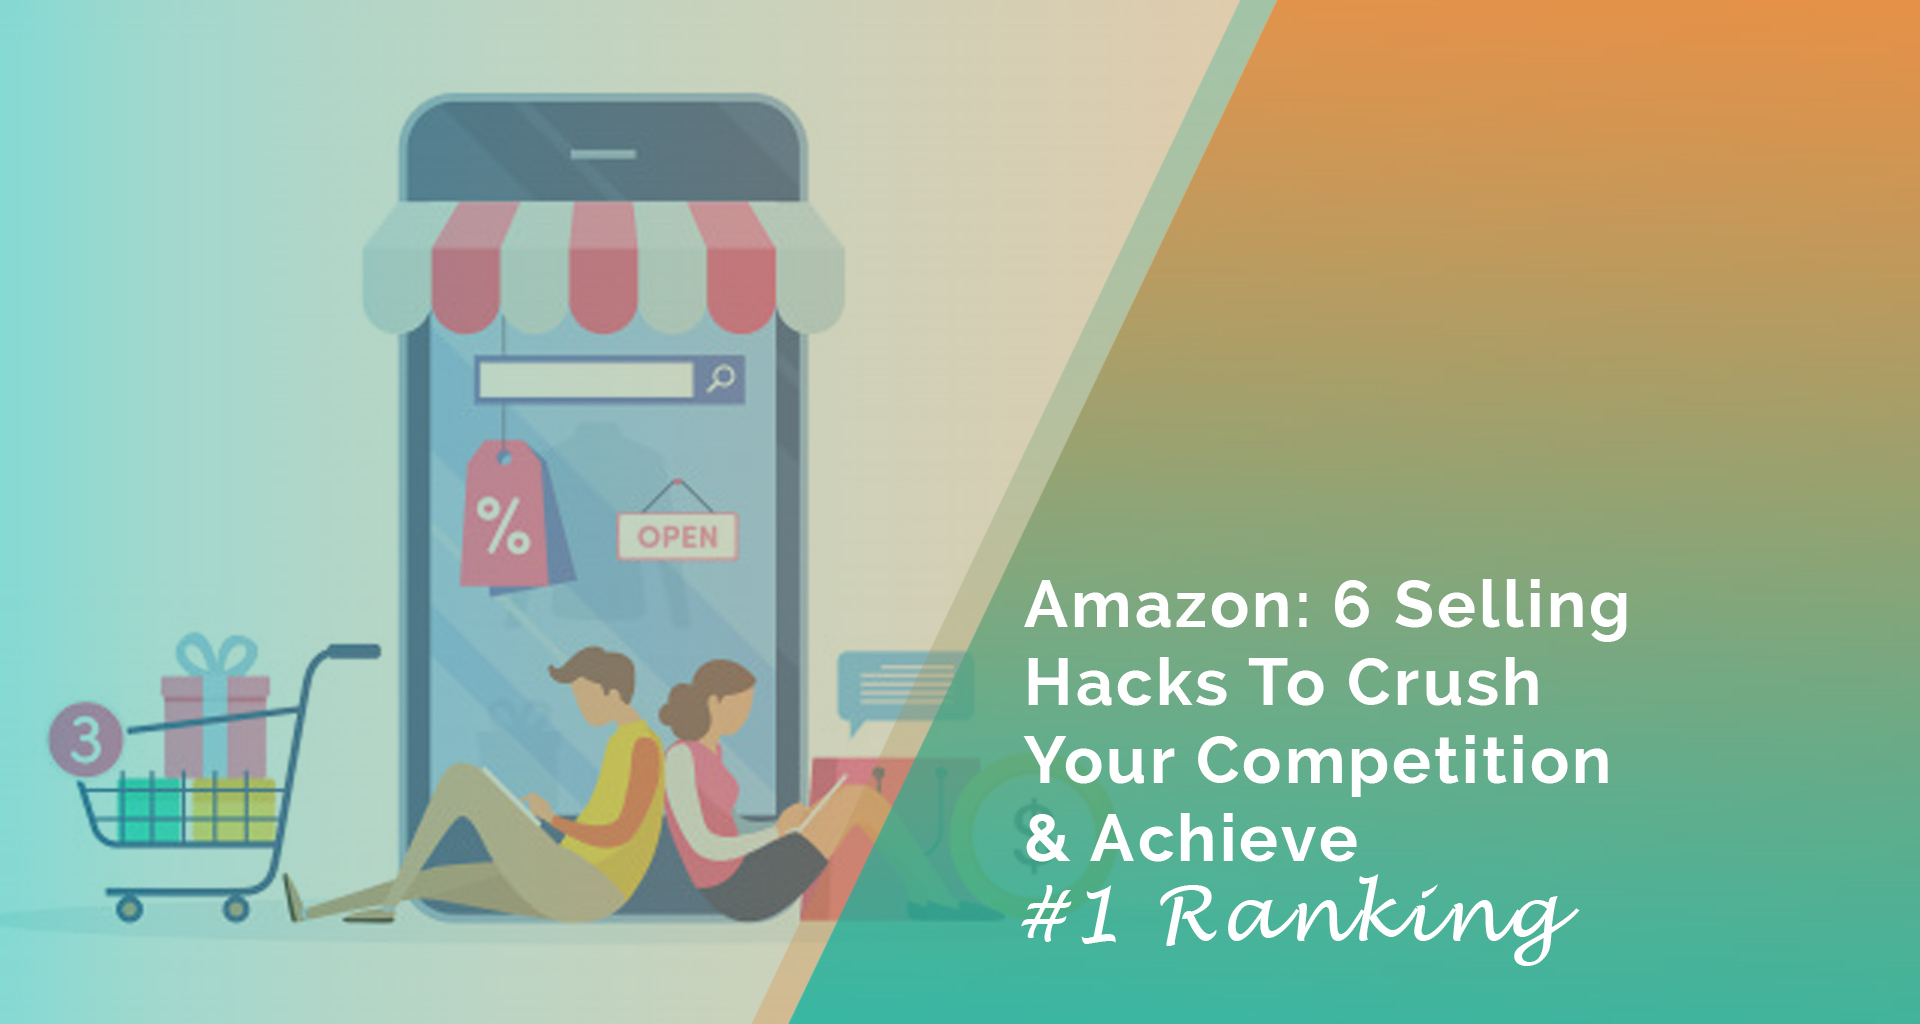 Amazon: 6 Selling Hacks To Crush Your Competition & Achieve The Number #1 Ranking For Your Products